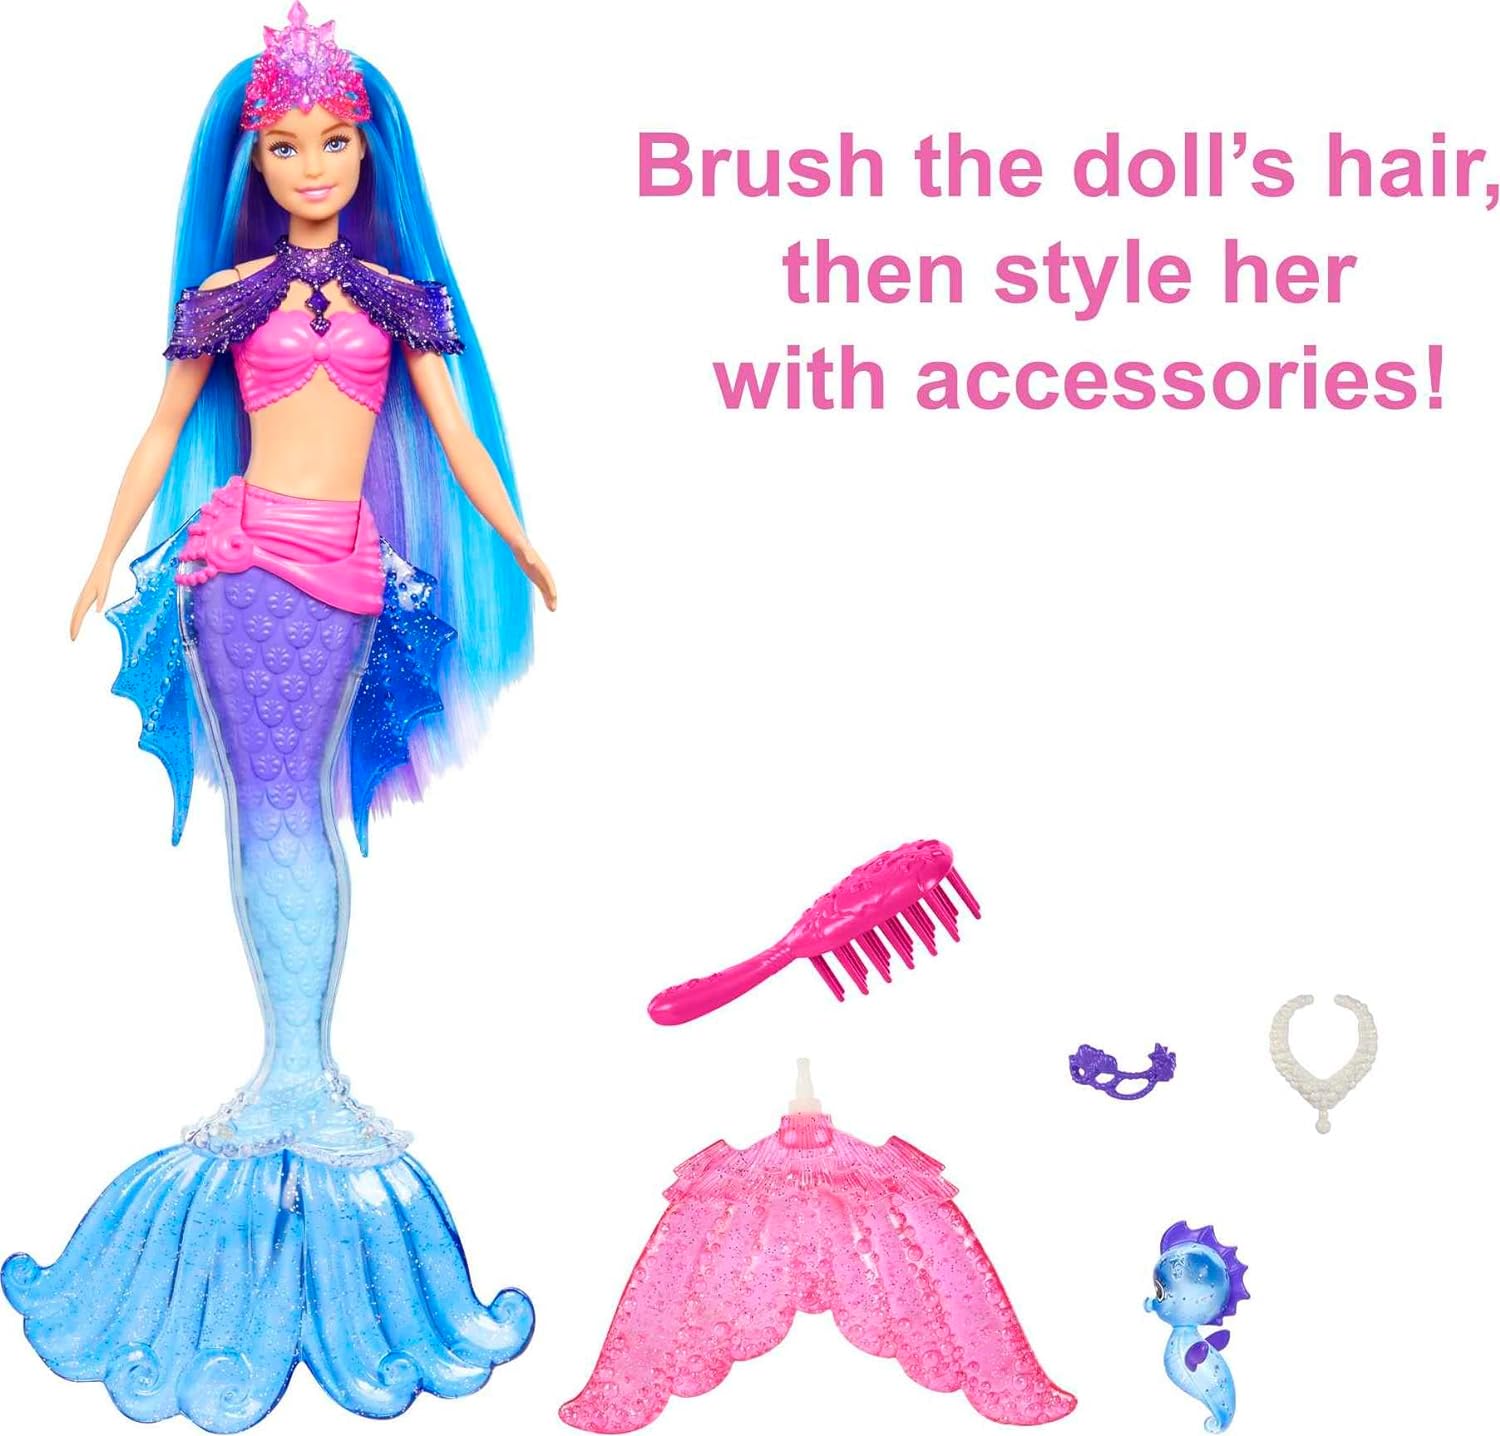 Barbie Mermaid Power Doll & Accessories Set with Mermaid Fashion Doll, Seahorse Pet, Interchangeable Fins & 5+ Storytelling Pieces